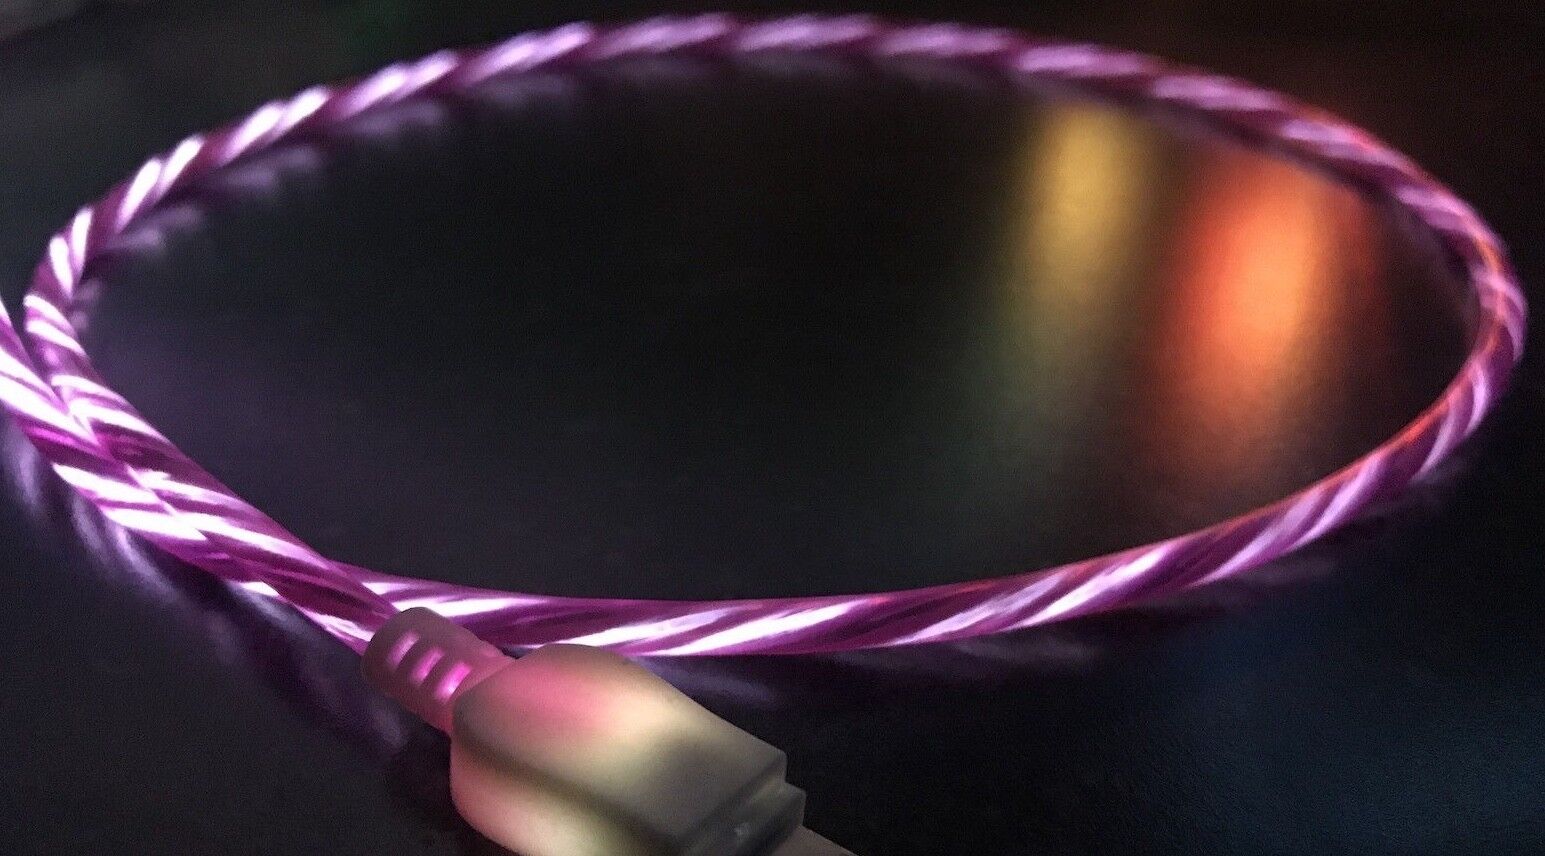 CANDY FLOW MOVING LIGHT led charger cable for REVERSIBLE MICRO C USB SMART PHONE